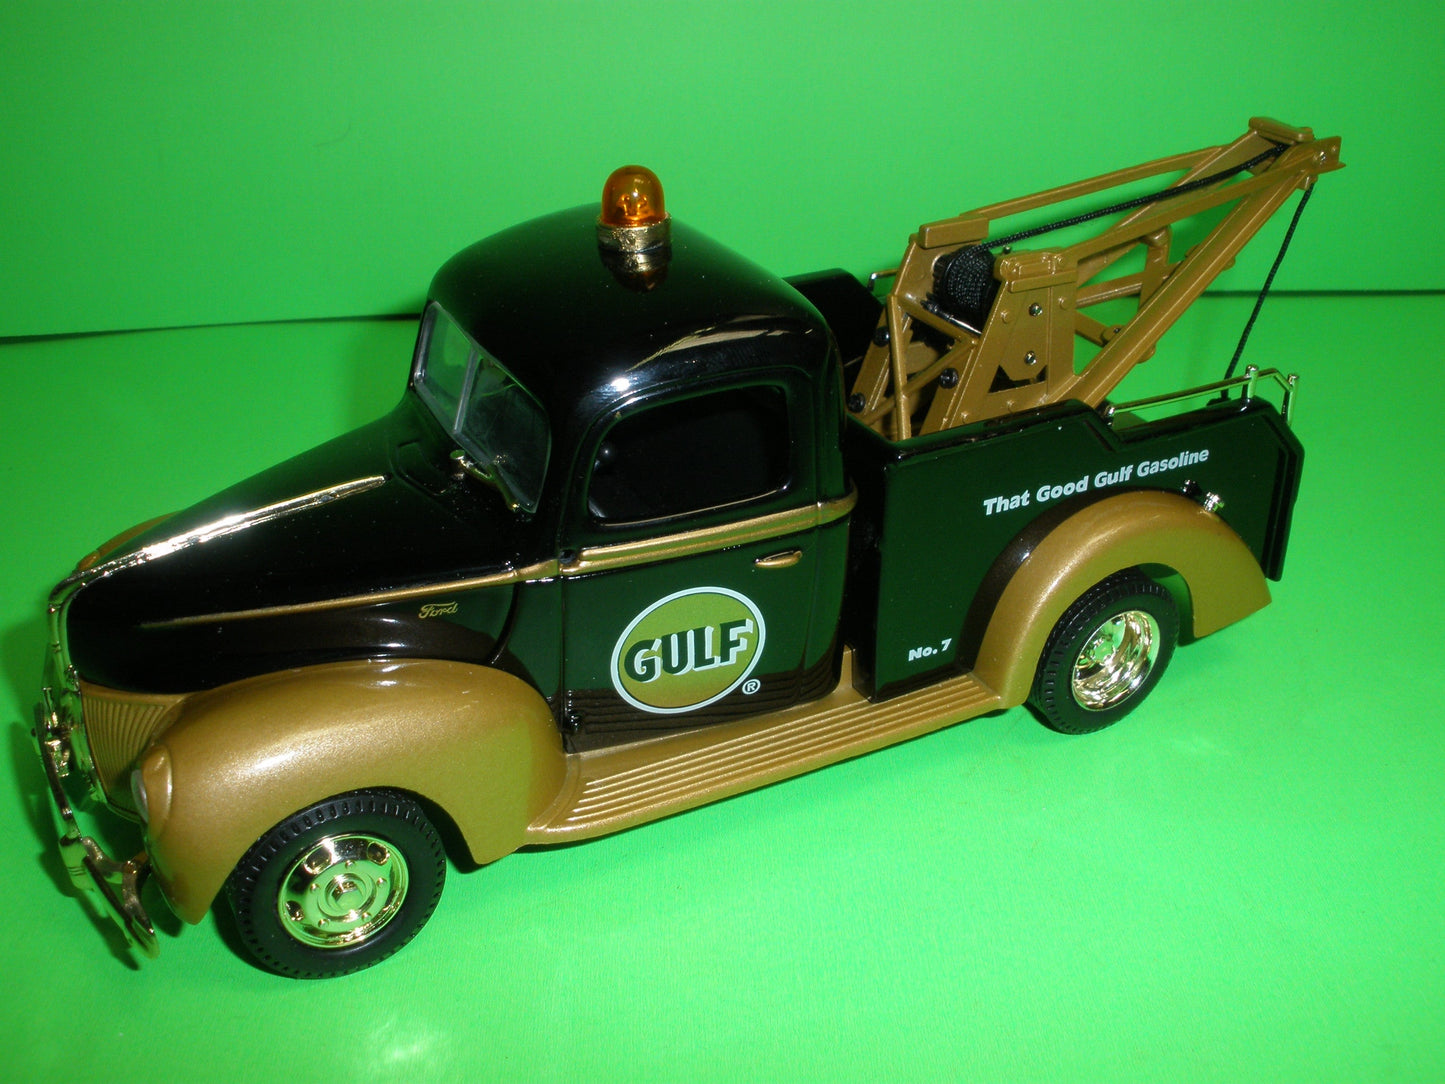 Gulf 1940 Ford Tow Truck Gold Sampler